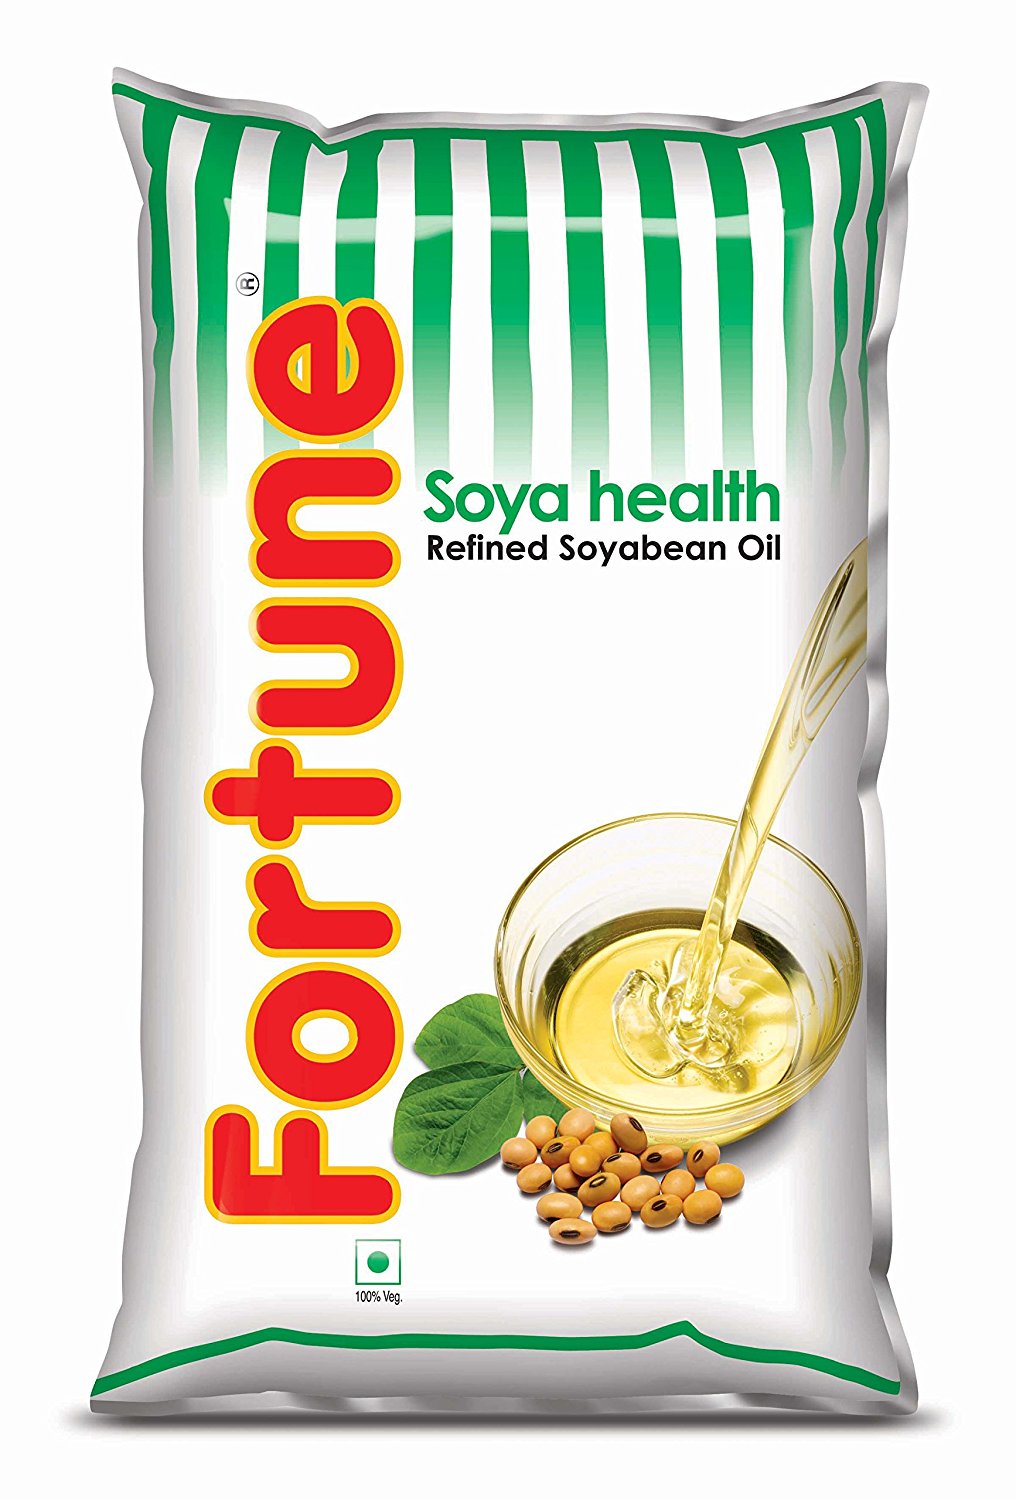 Fortune Soyabean Oil Photos Image And Wallpaper Mouthshut